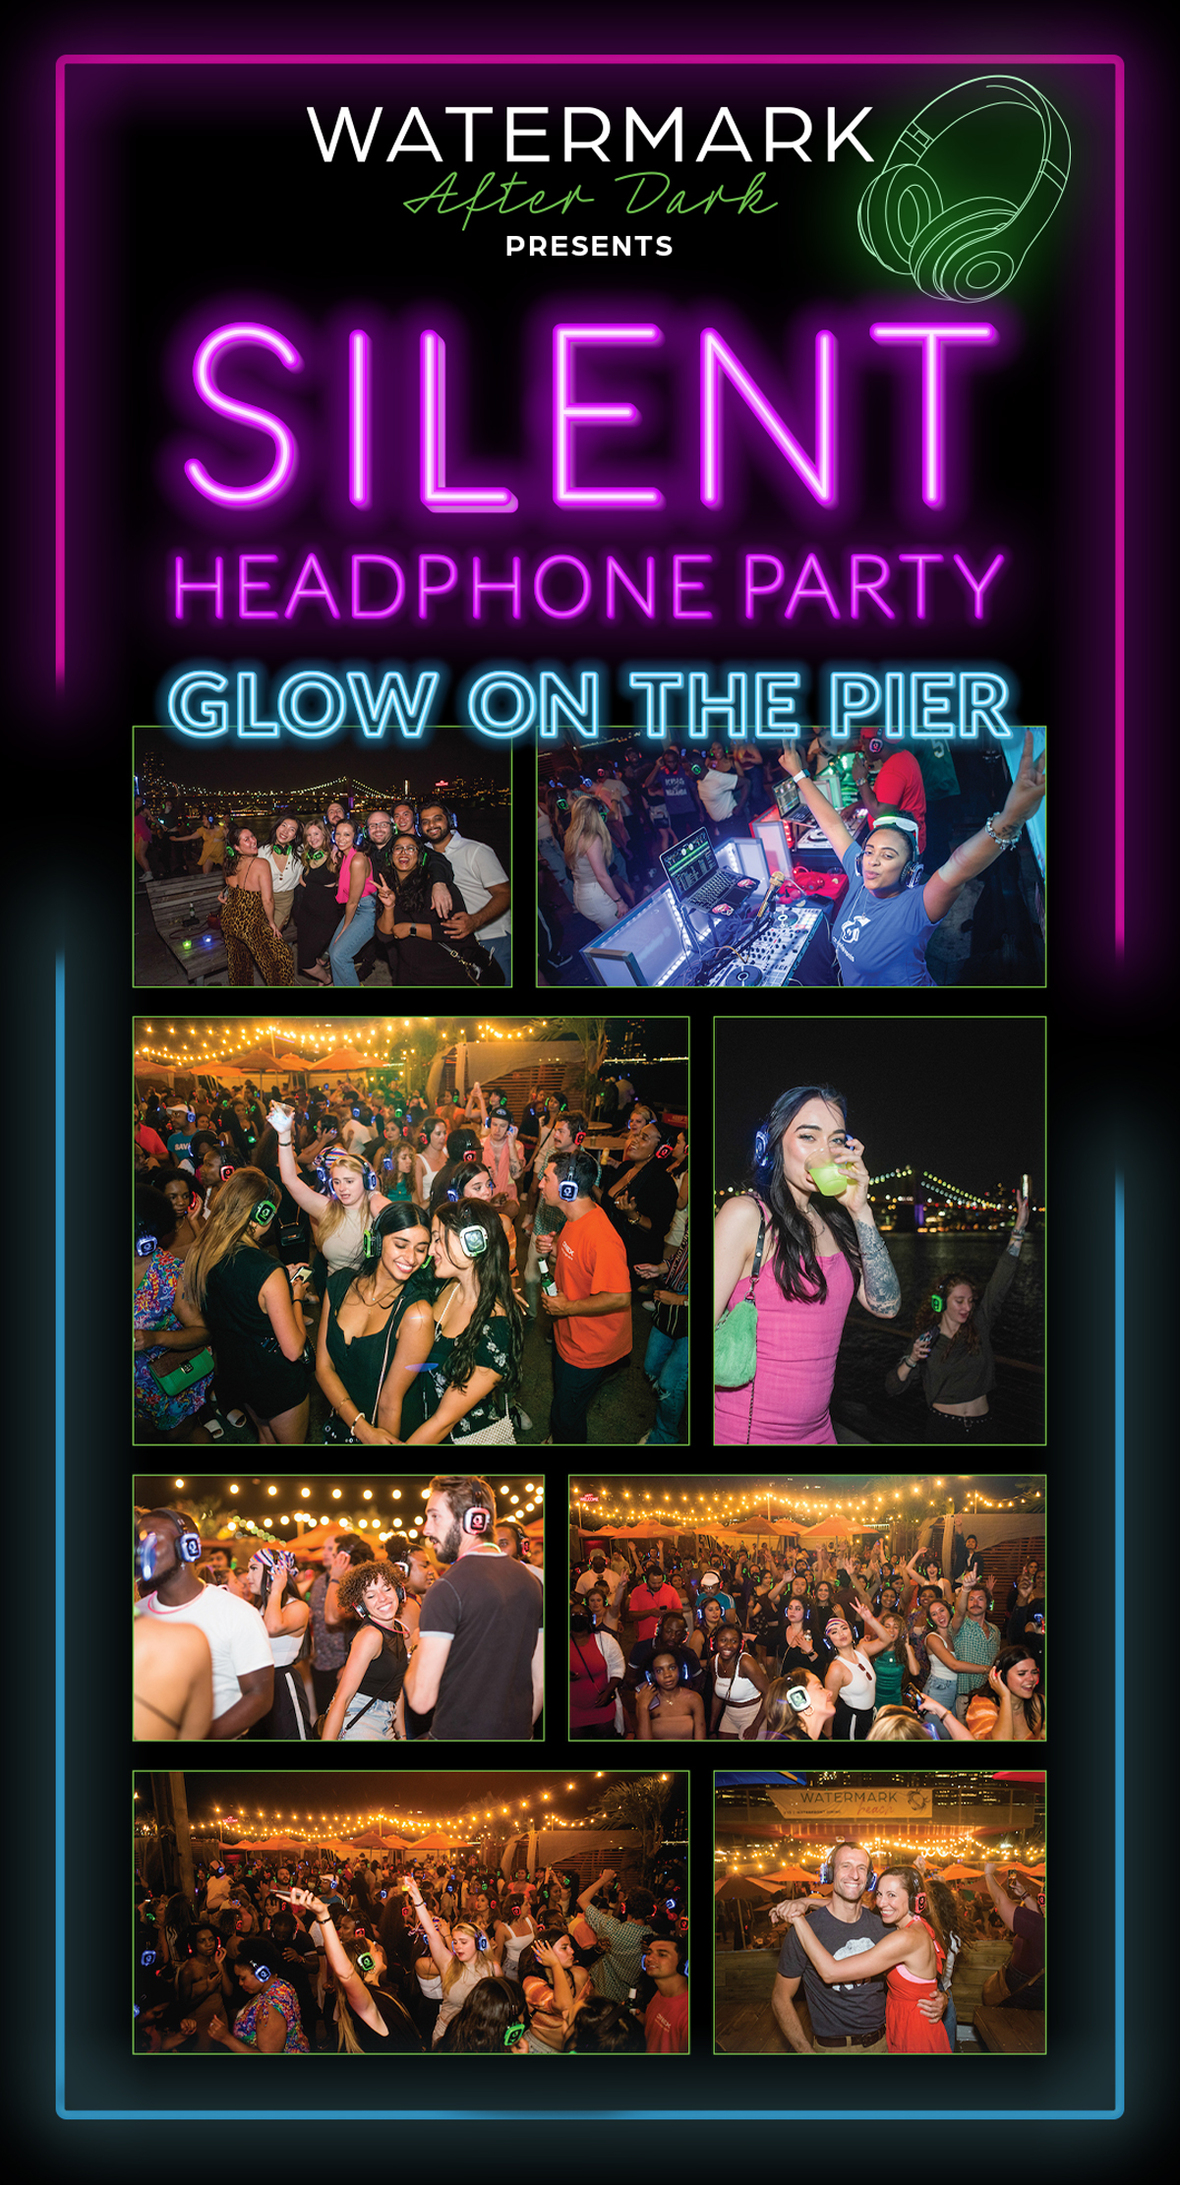 Watermark-Silent-Headphone-Party-1200px